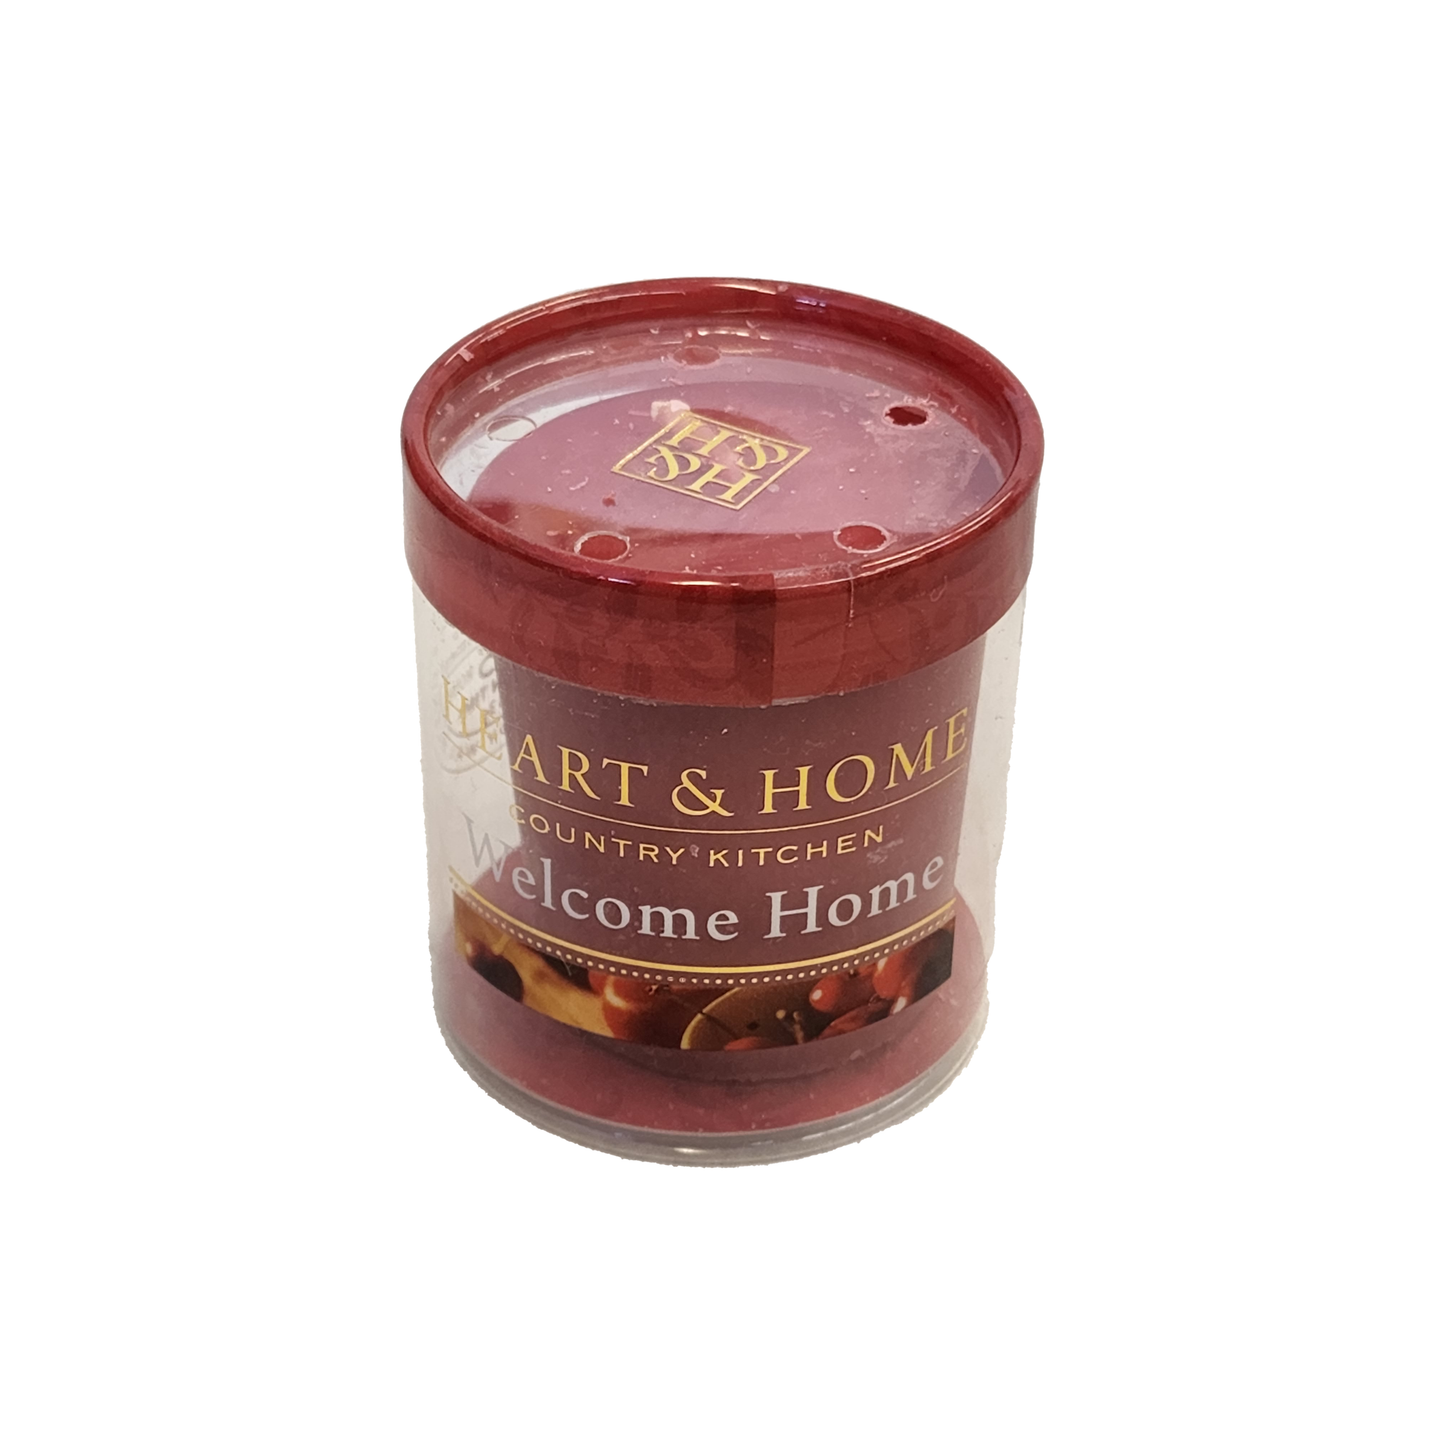 Heart and Home Cylinder Candles